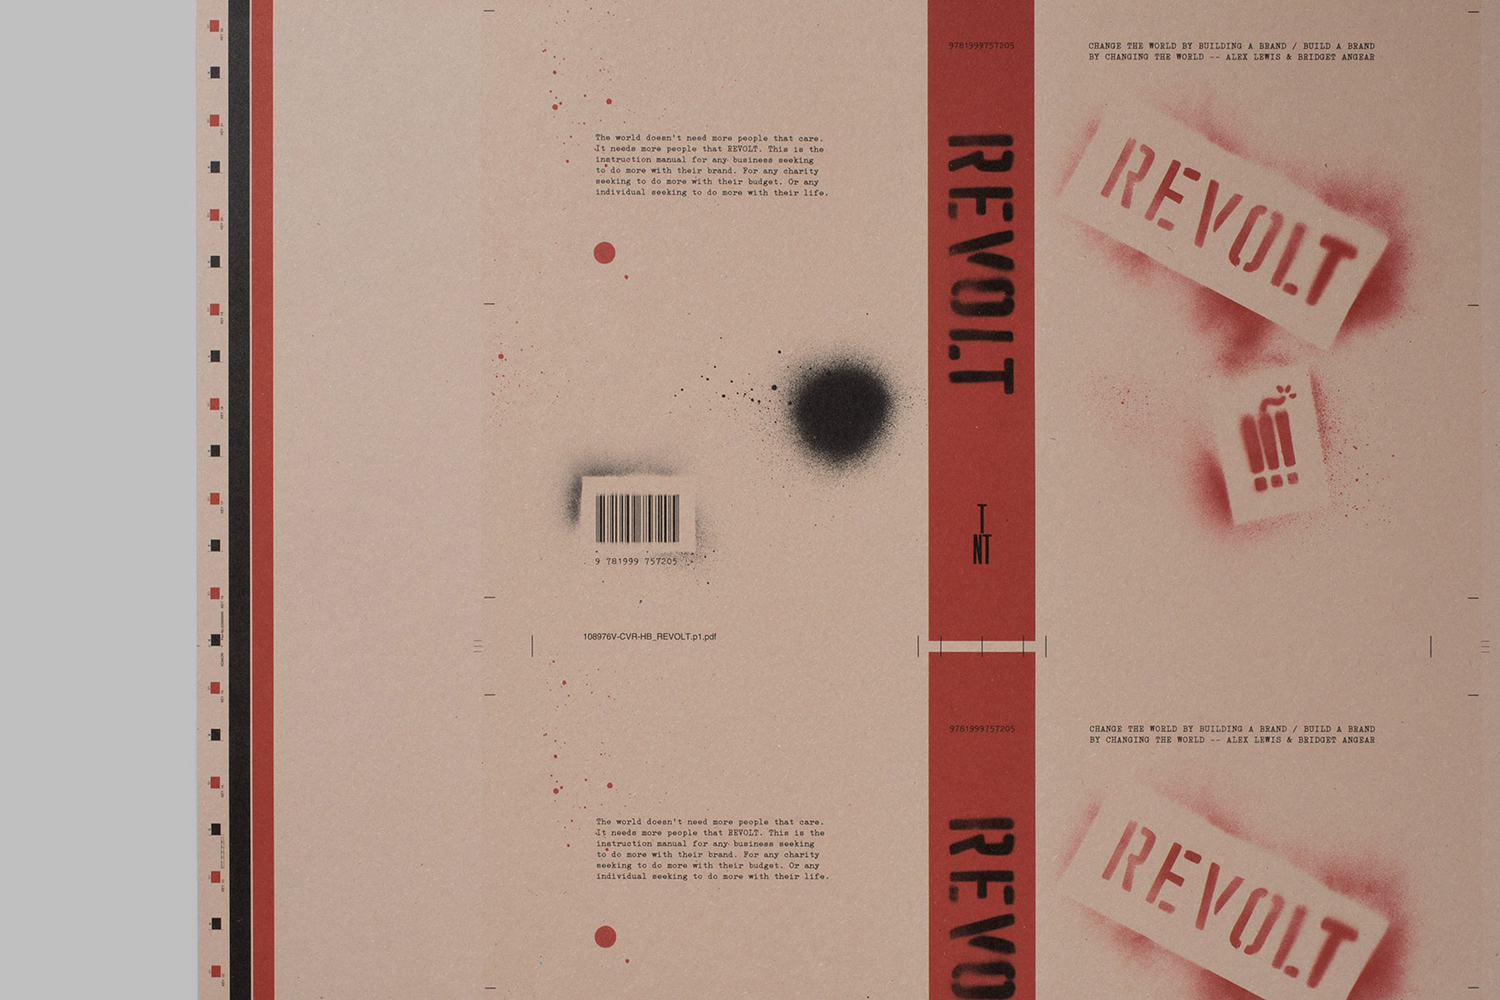 Hardcover book design by Paul Belford Ltd. for Revolt by Alex Lewis and Bridget Angear